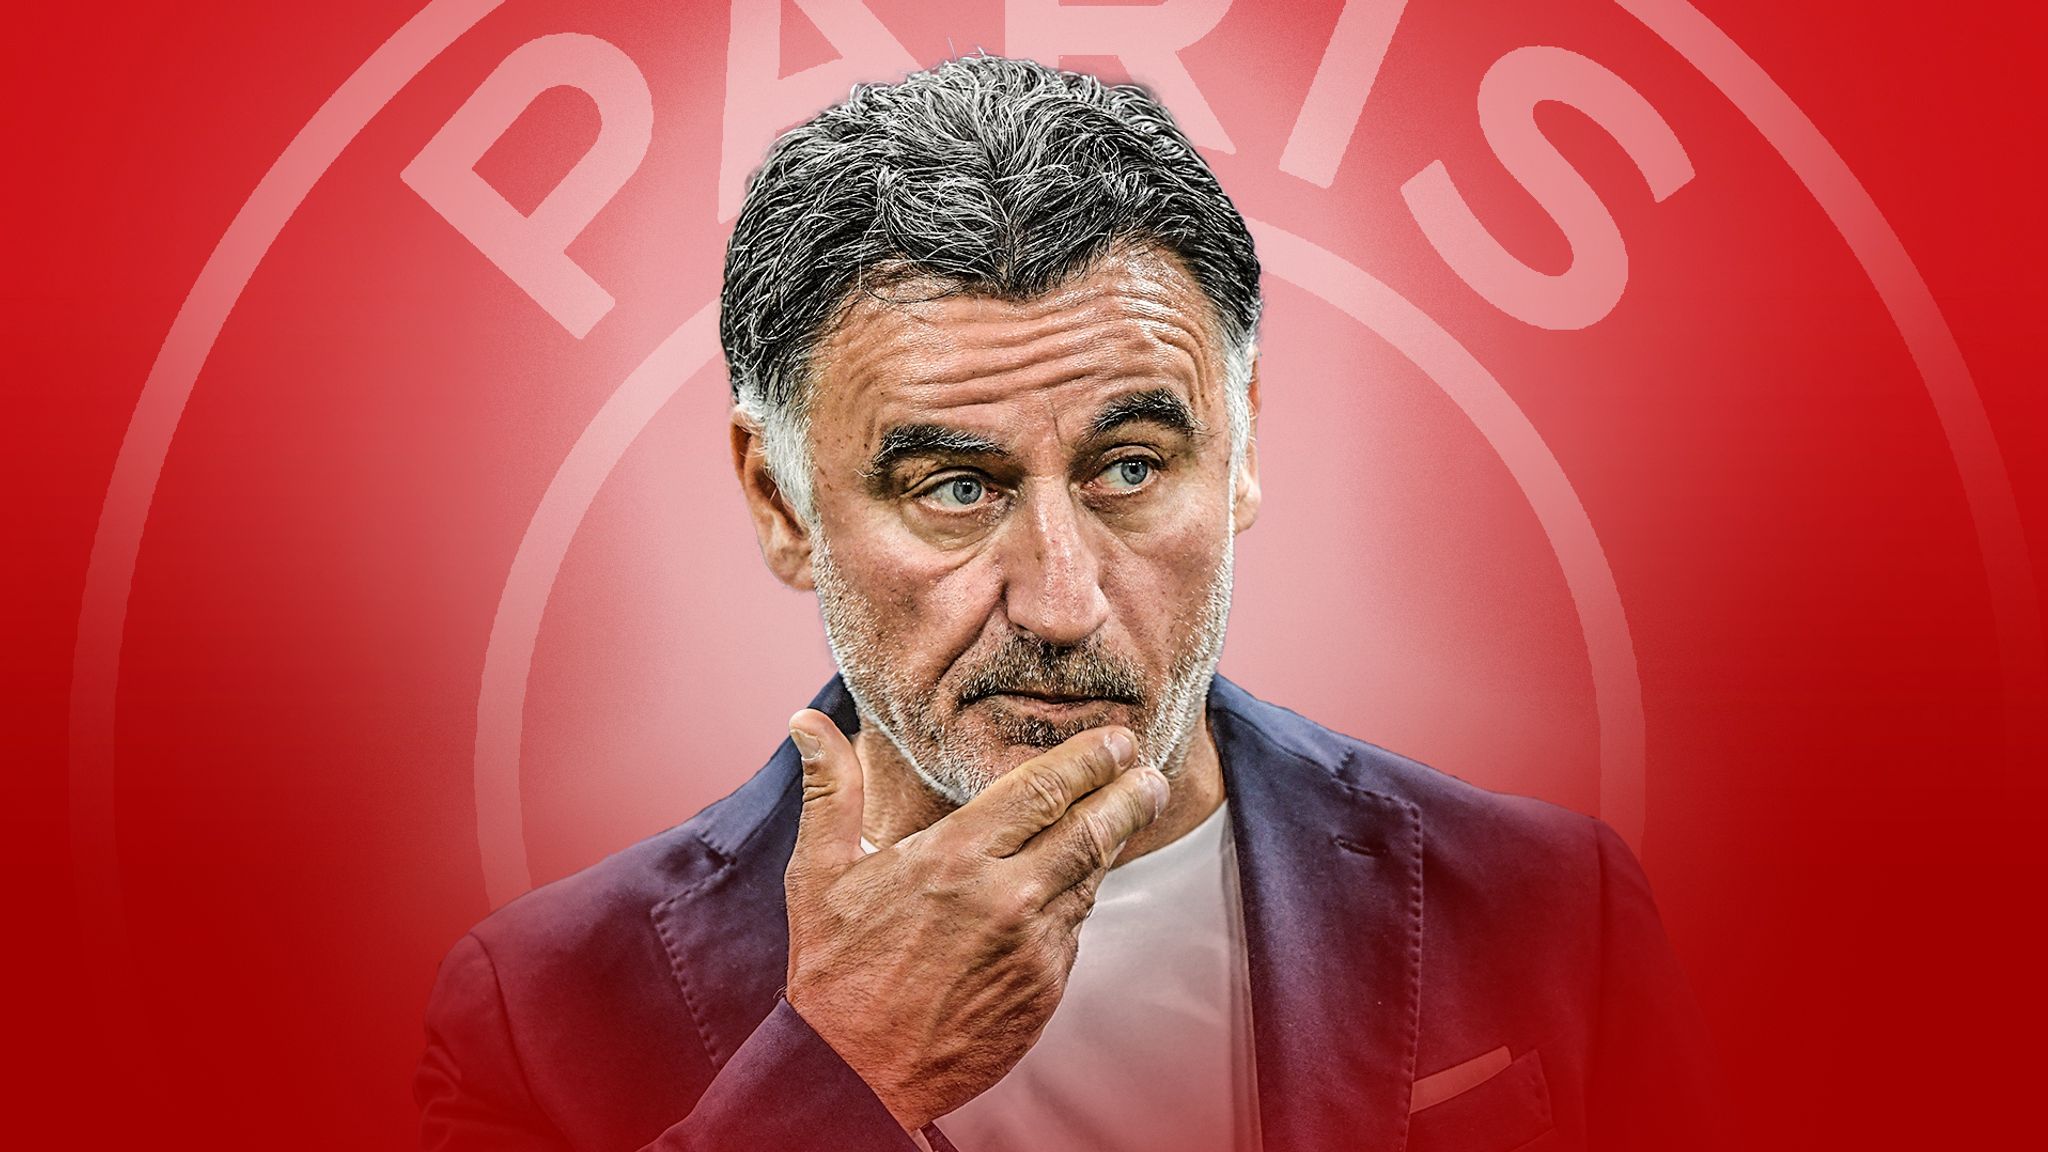 PSG name Galtier as new manager after sacking Pochettino, Football News